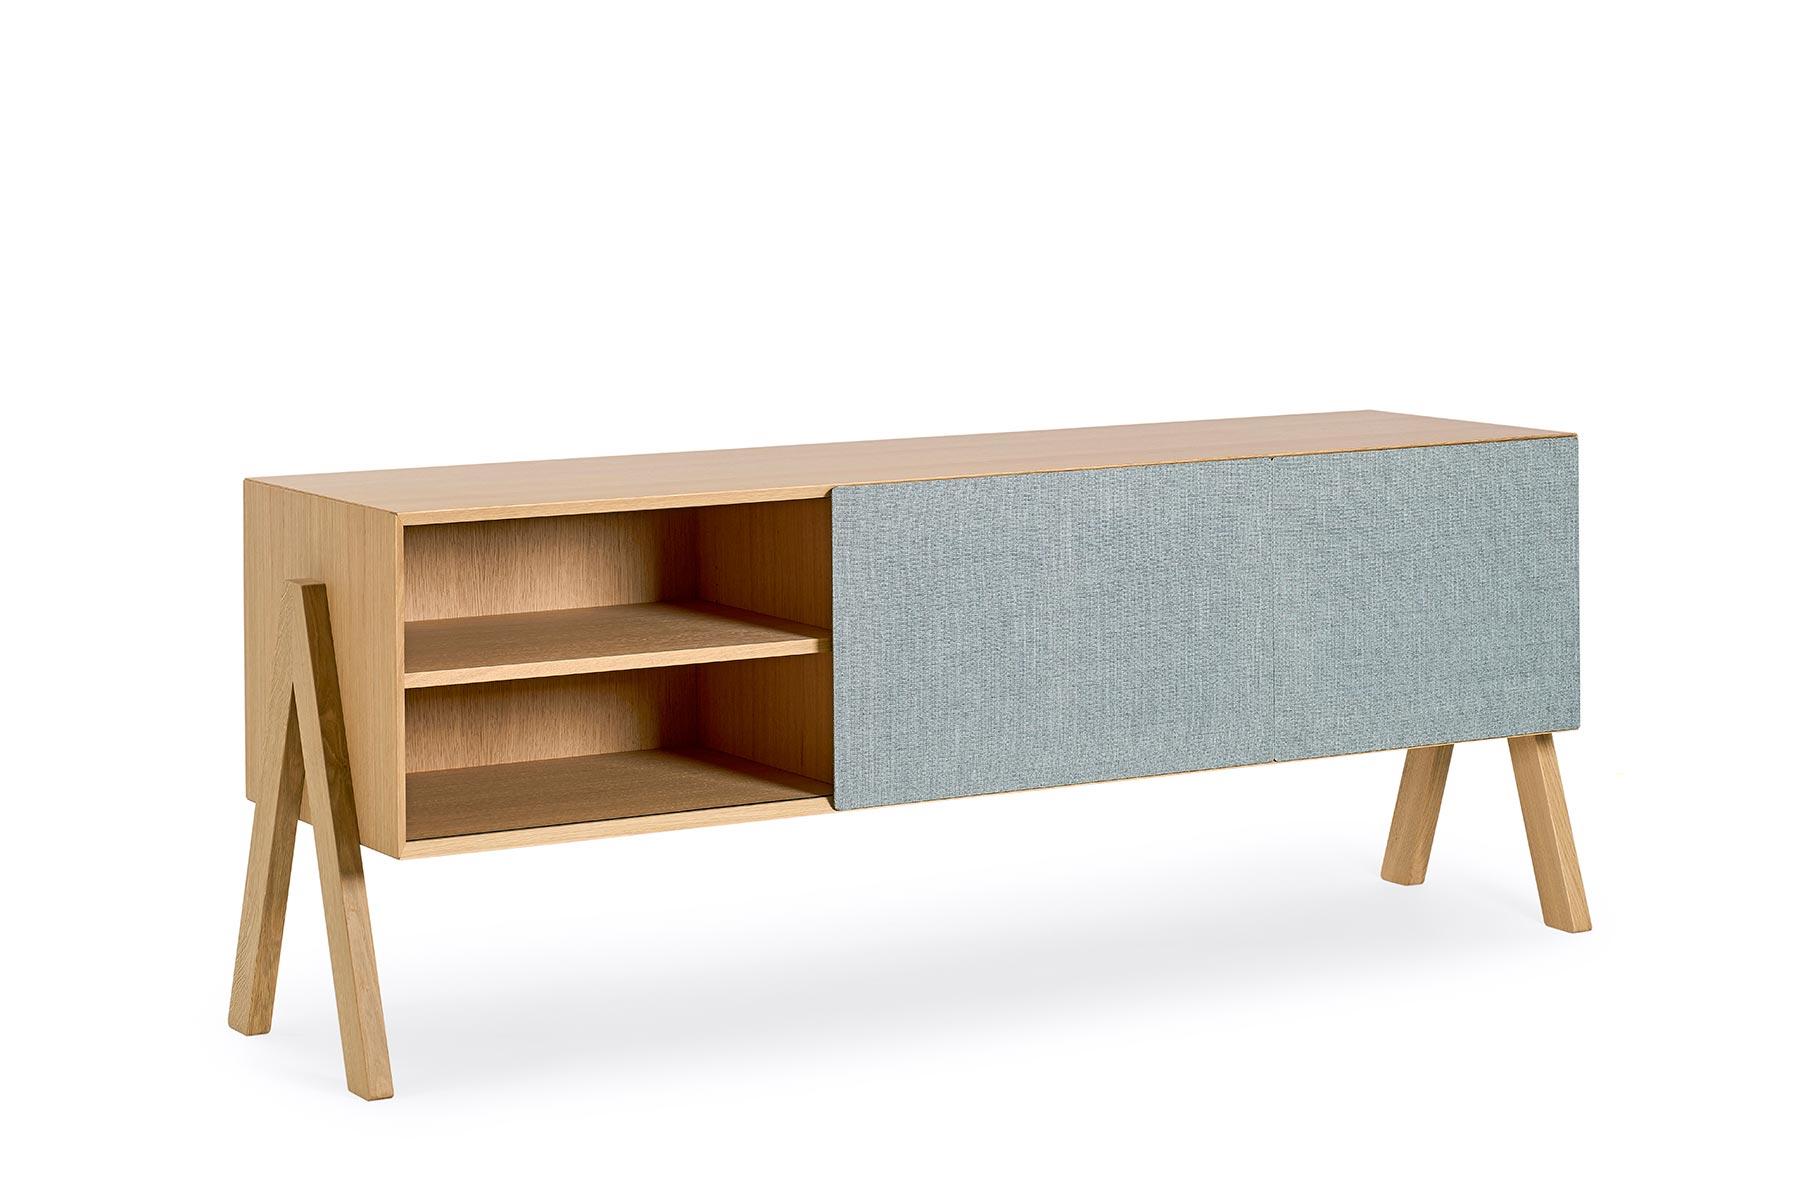 Designed by Friis and Moltke in 2017, this Minimalist’s credenza features exterior mounted V-legs with two cloth cabinet doors that slide from one bay to the next. Crafted in solid wood, this credenza is hand built at Getama’s factory in Gedsted,